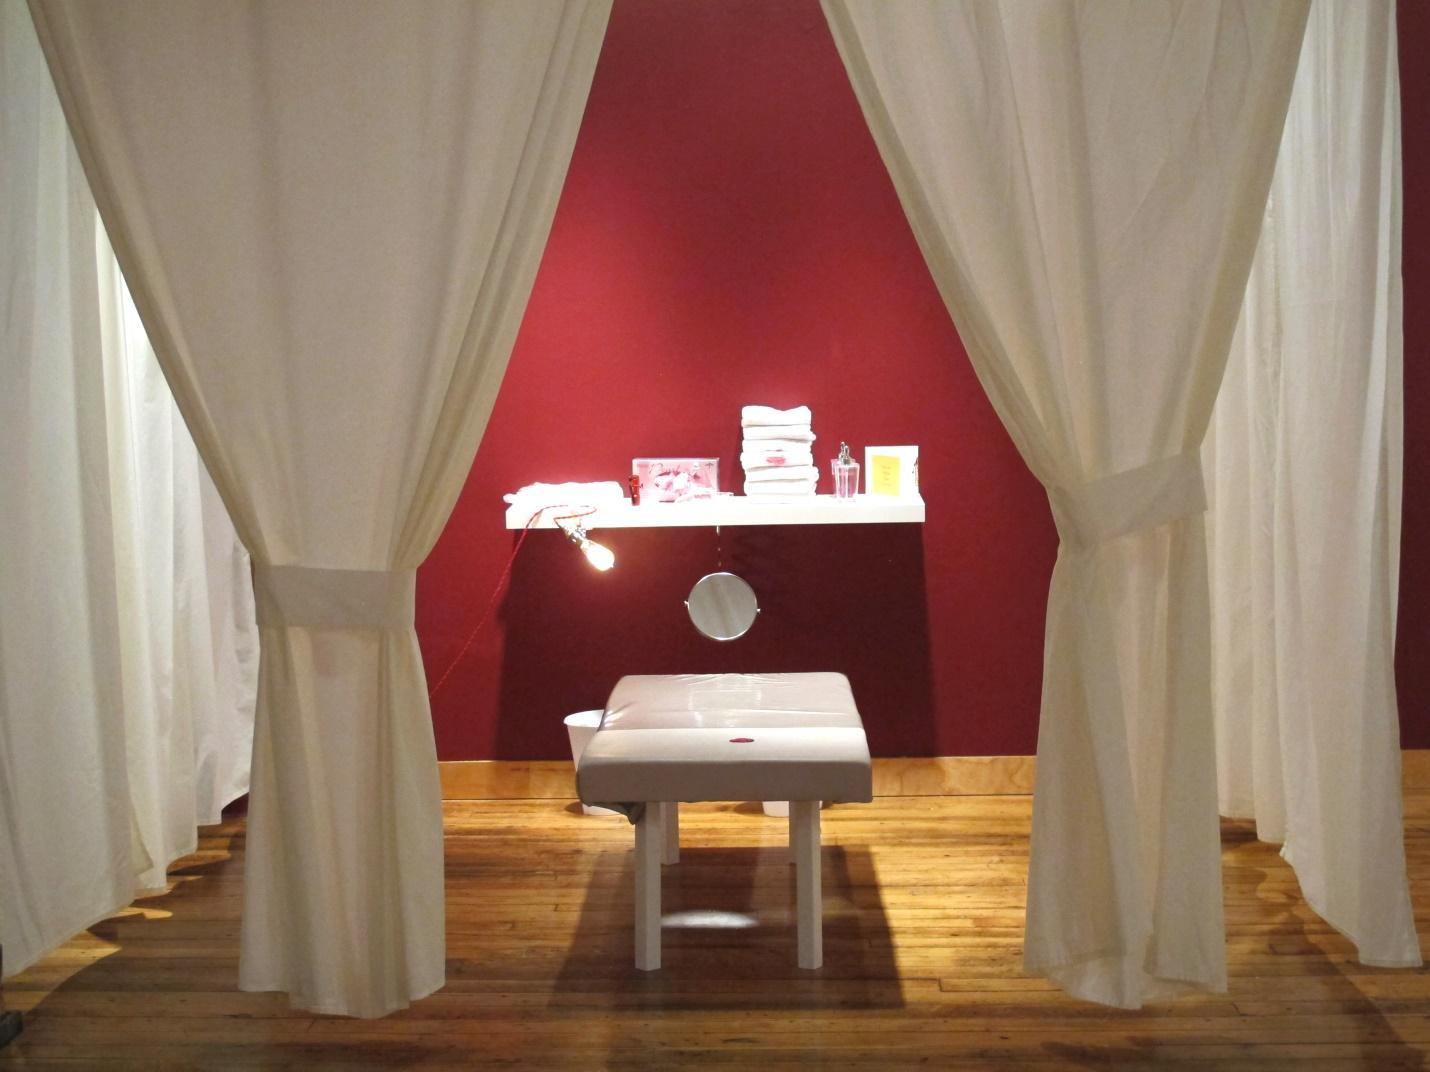 This is a photograph of “Cervical Self Exam Room” an installation by Vanessa
        Dion Fletcher as part of her exhibition Own Your Cervix at Tangled
        Art Gallery. In the centre of the photo, a grey leather examination table
        is arranged in front of a dark red wall. Behind the table on the wall is
        a white floating shelf with white towels folded and stacked in a pile,
        an informational pamphlet, a light bulb, and a circular mirror attached
        to the edge. On the left and right are white curtains that extend from
        the wall and can be drawn to create a private space in which to perform
        self-examinations, in whatever form that might take.